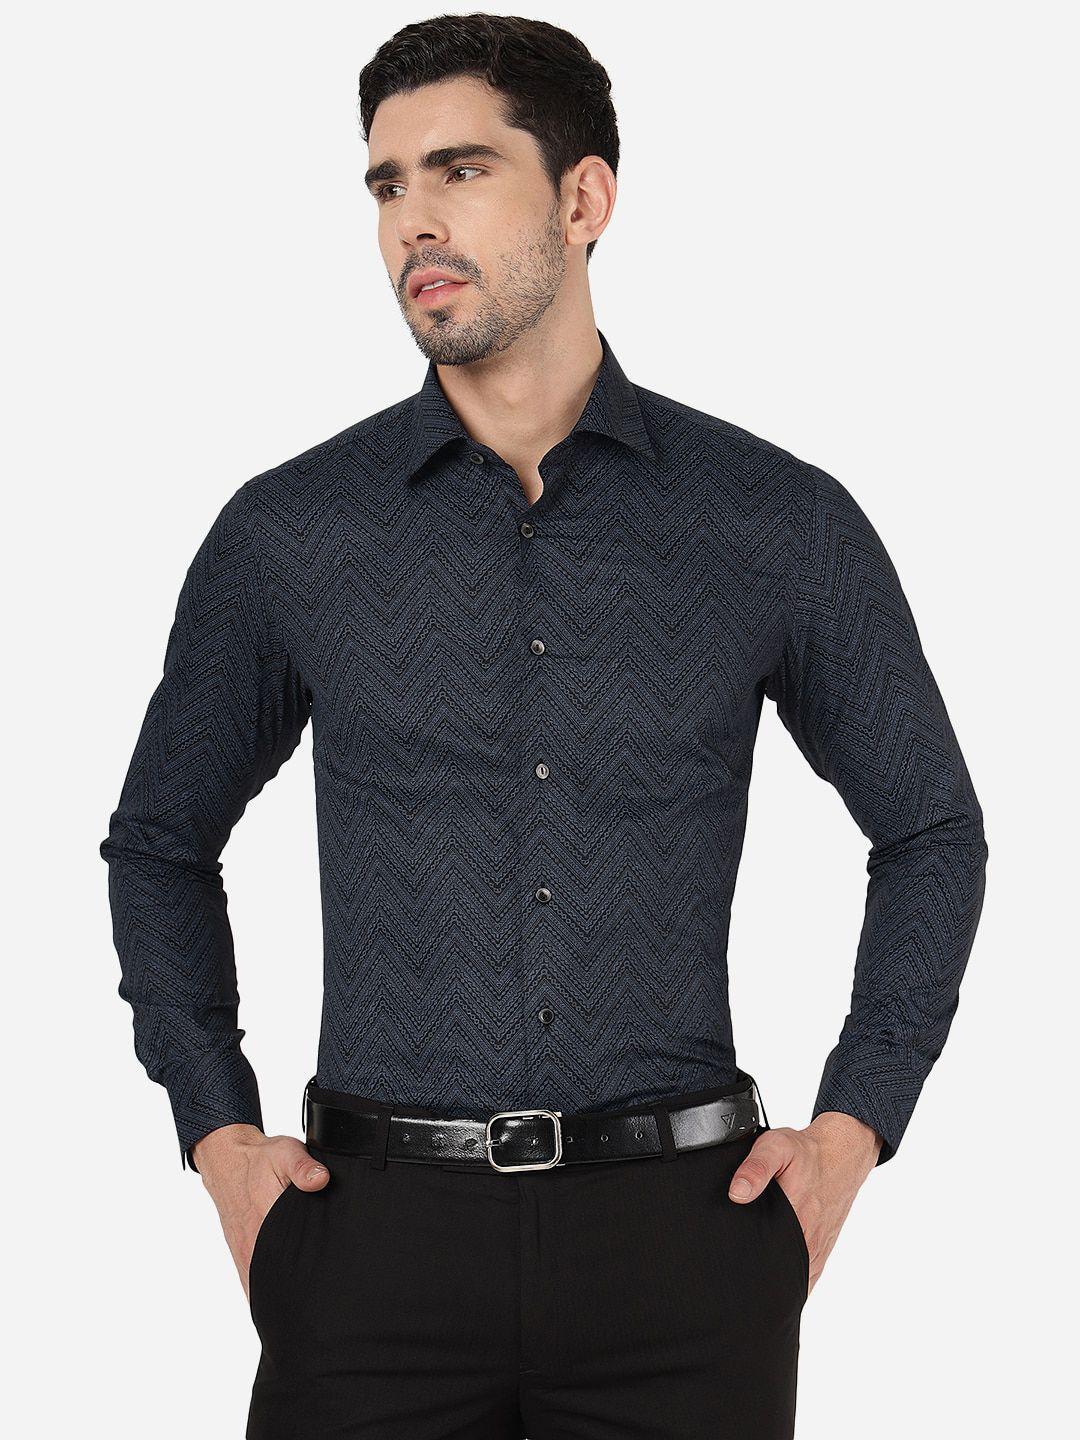 wyre slim fit abstract printed pure cotton party shirt